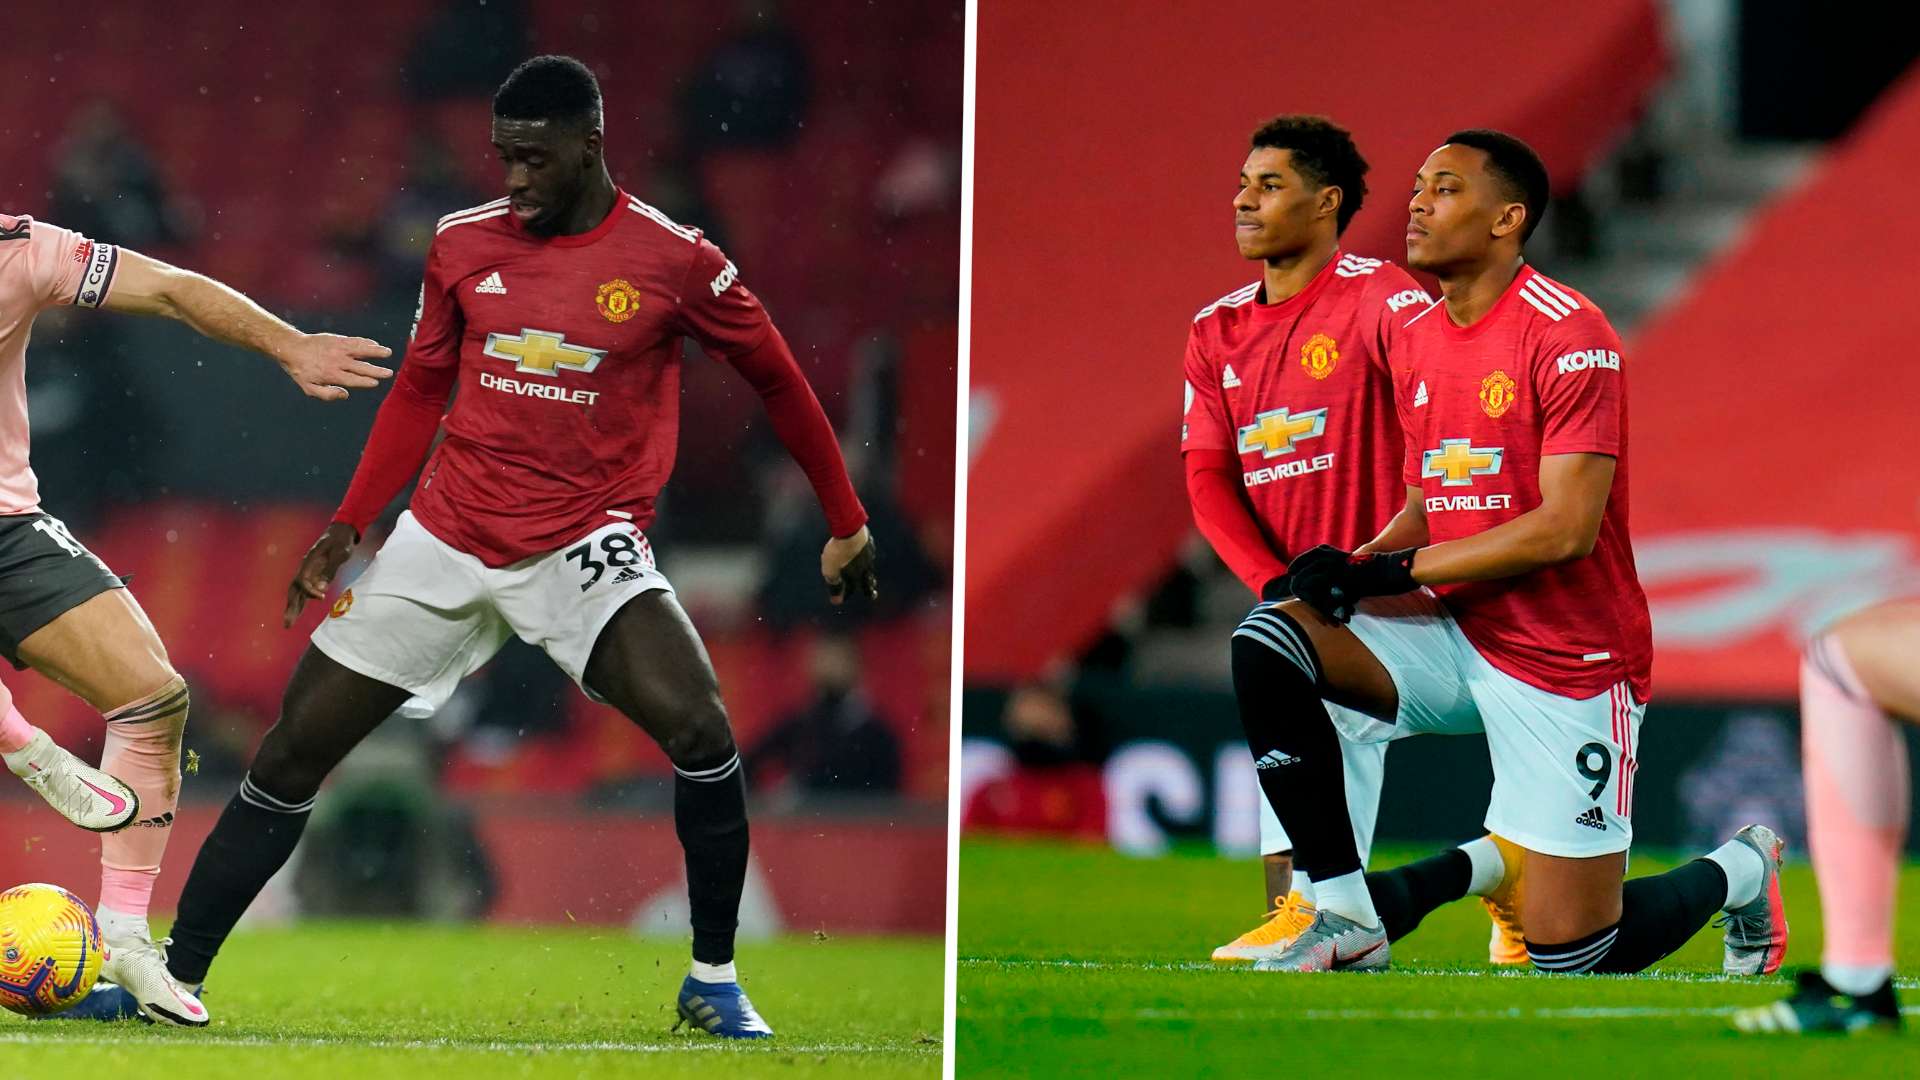 Axel Tuanzebe & Anthony Martial - Manchester United 2021